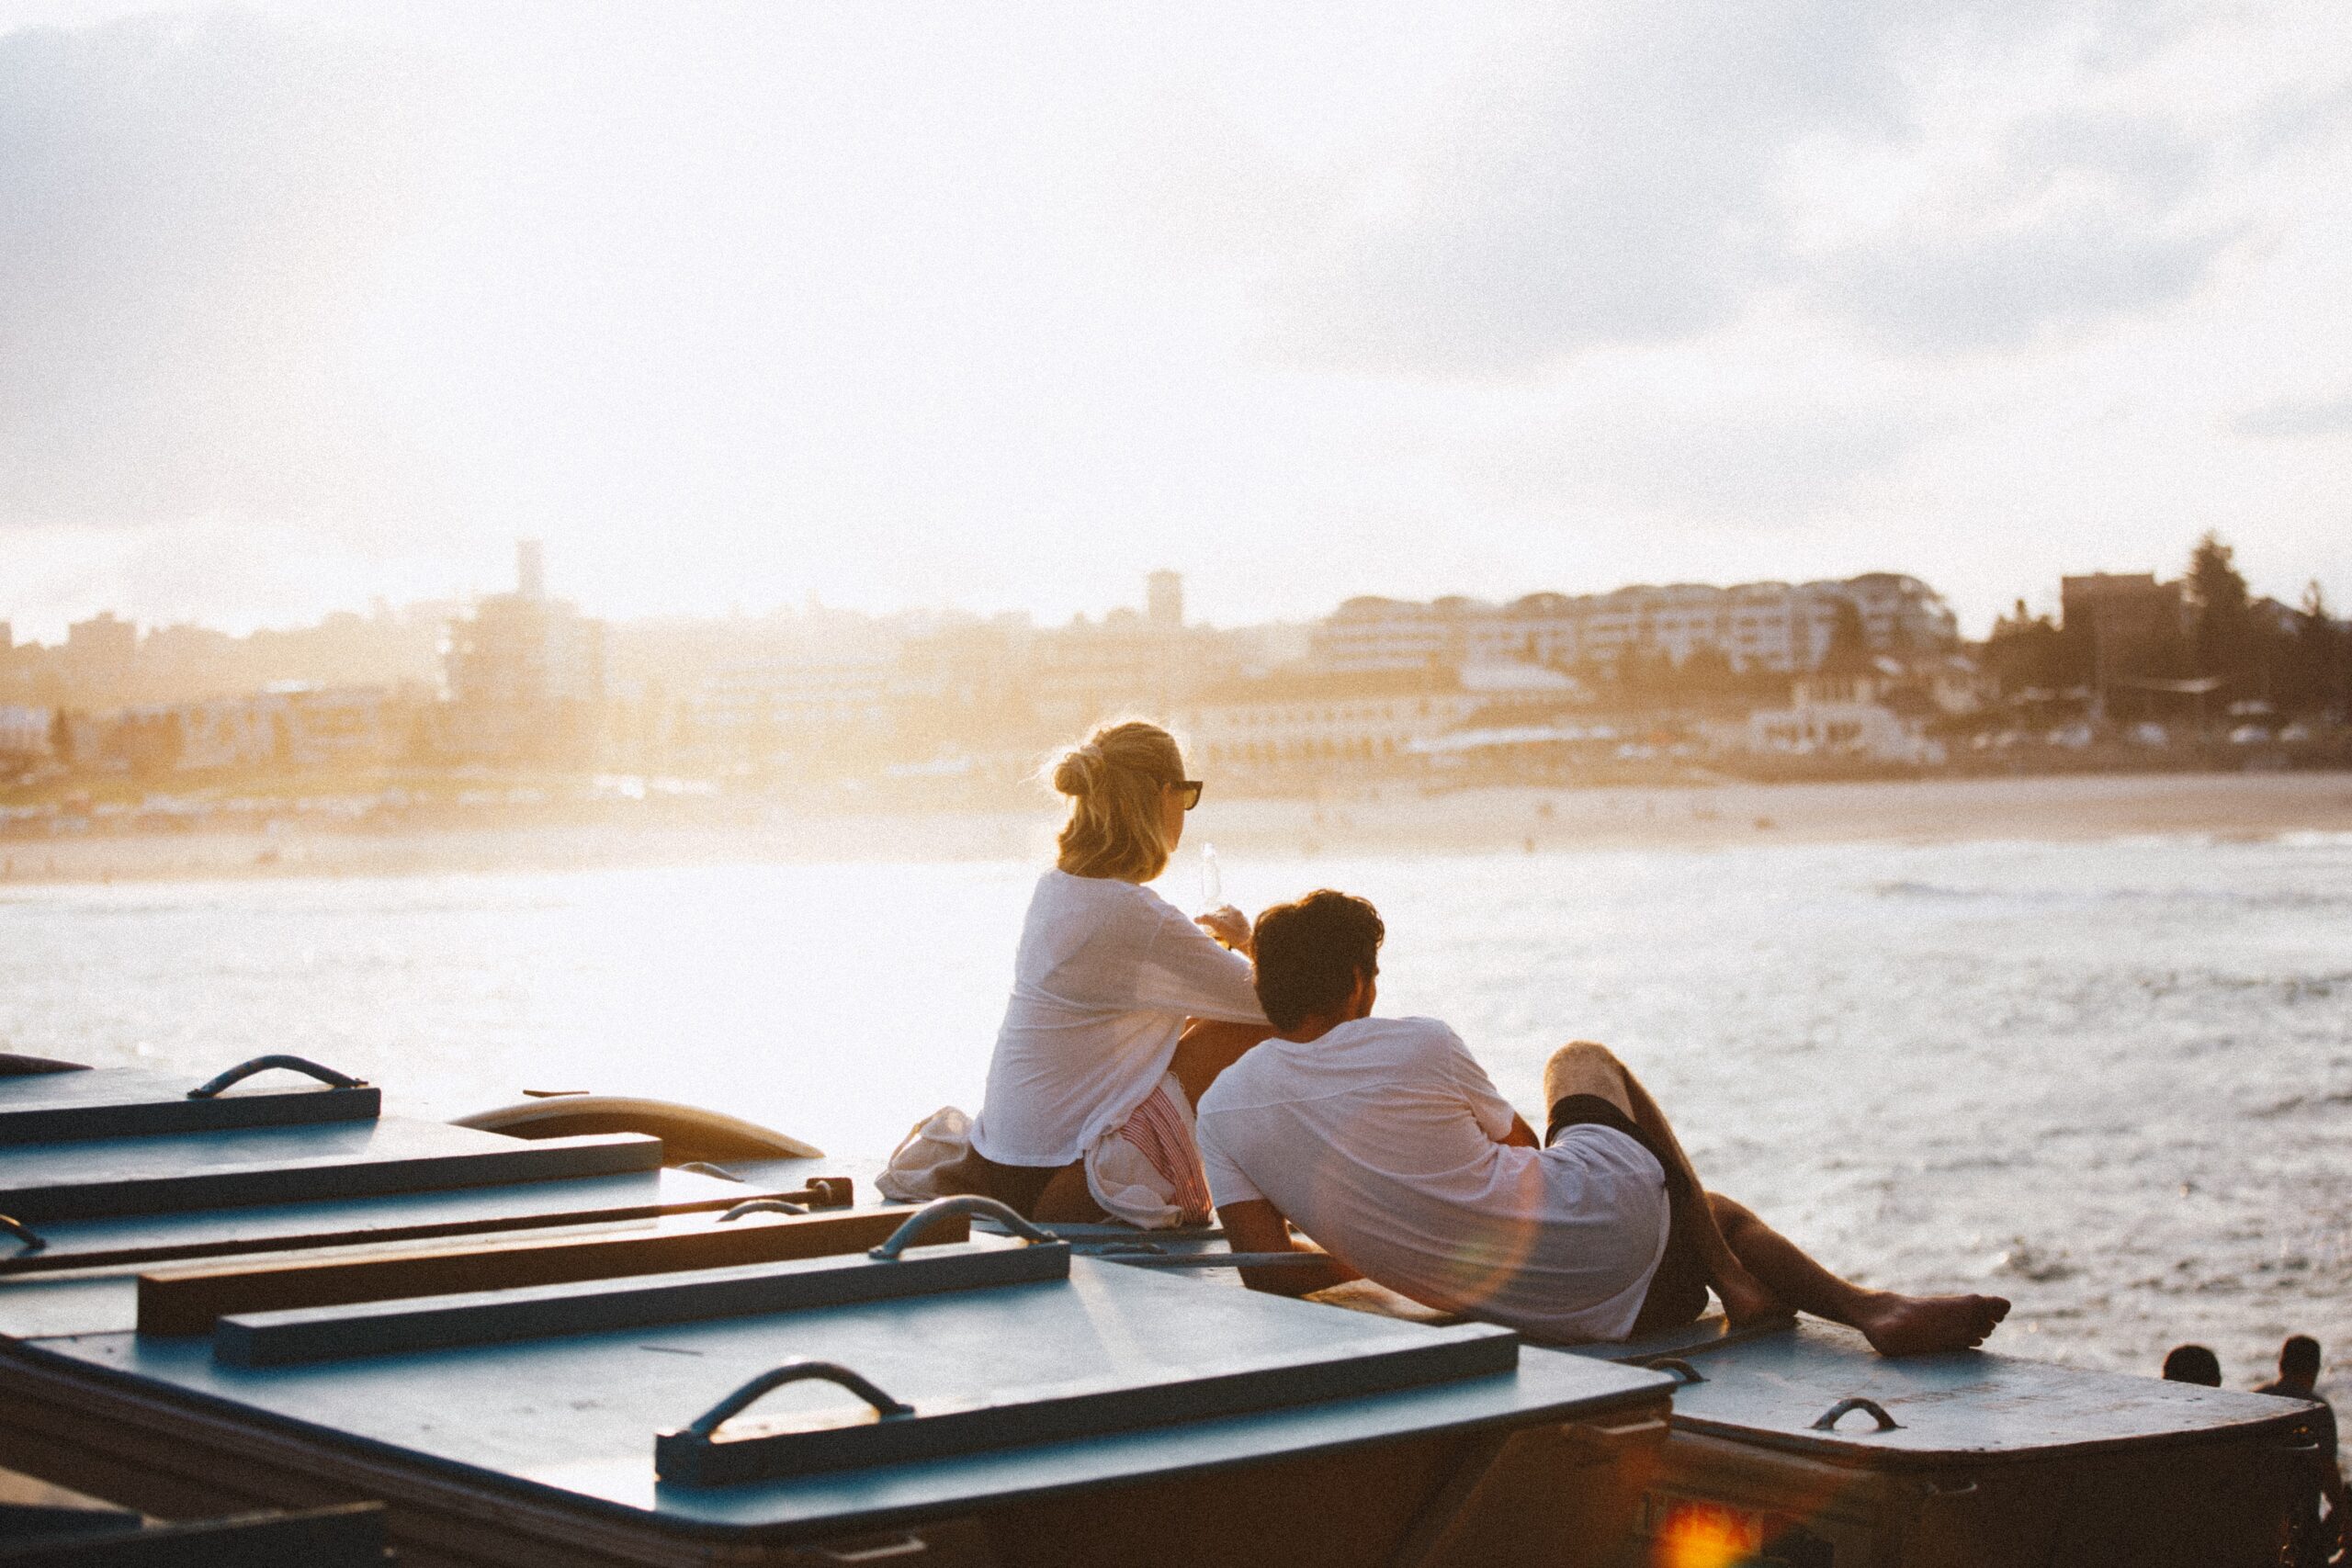 Couple on a boat in Sydney, Australia